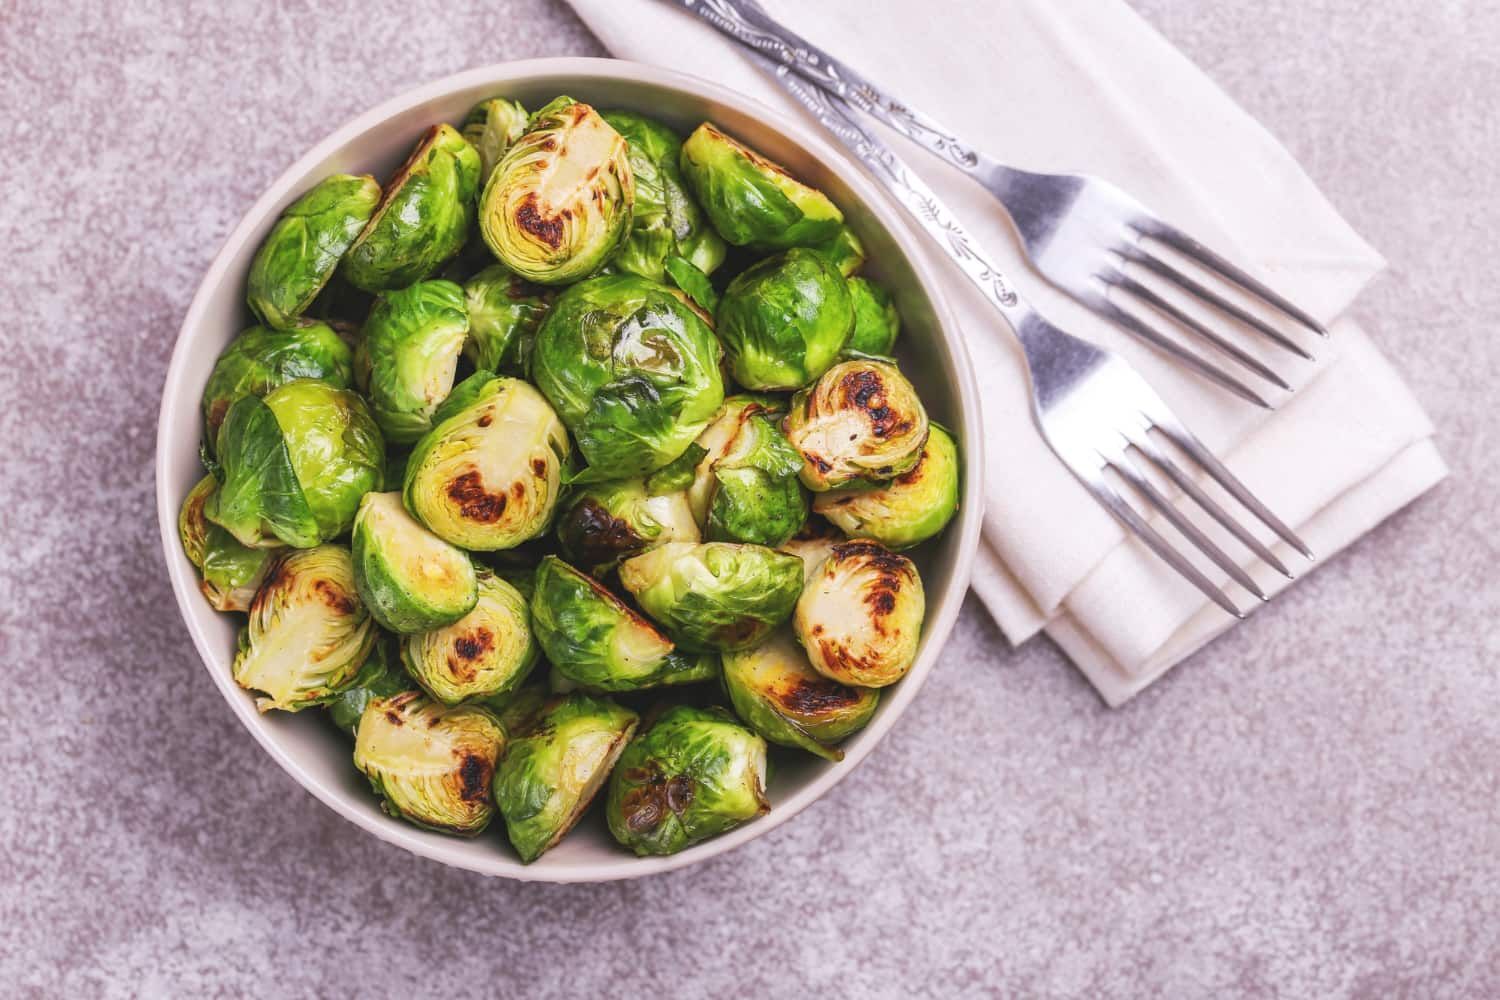 Simple roasted brussels sprouts in a bowl with charred edges.